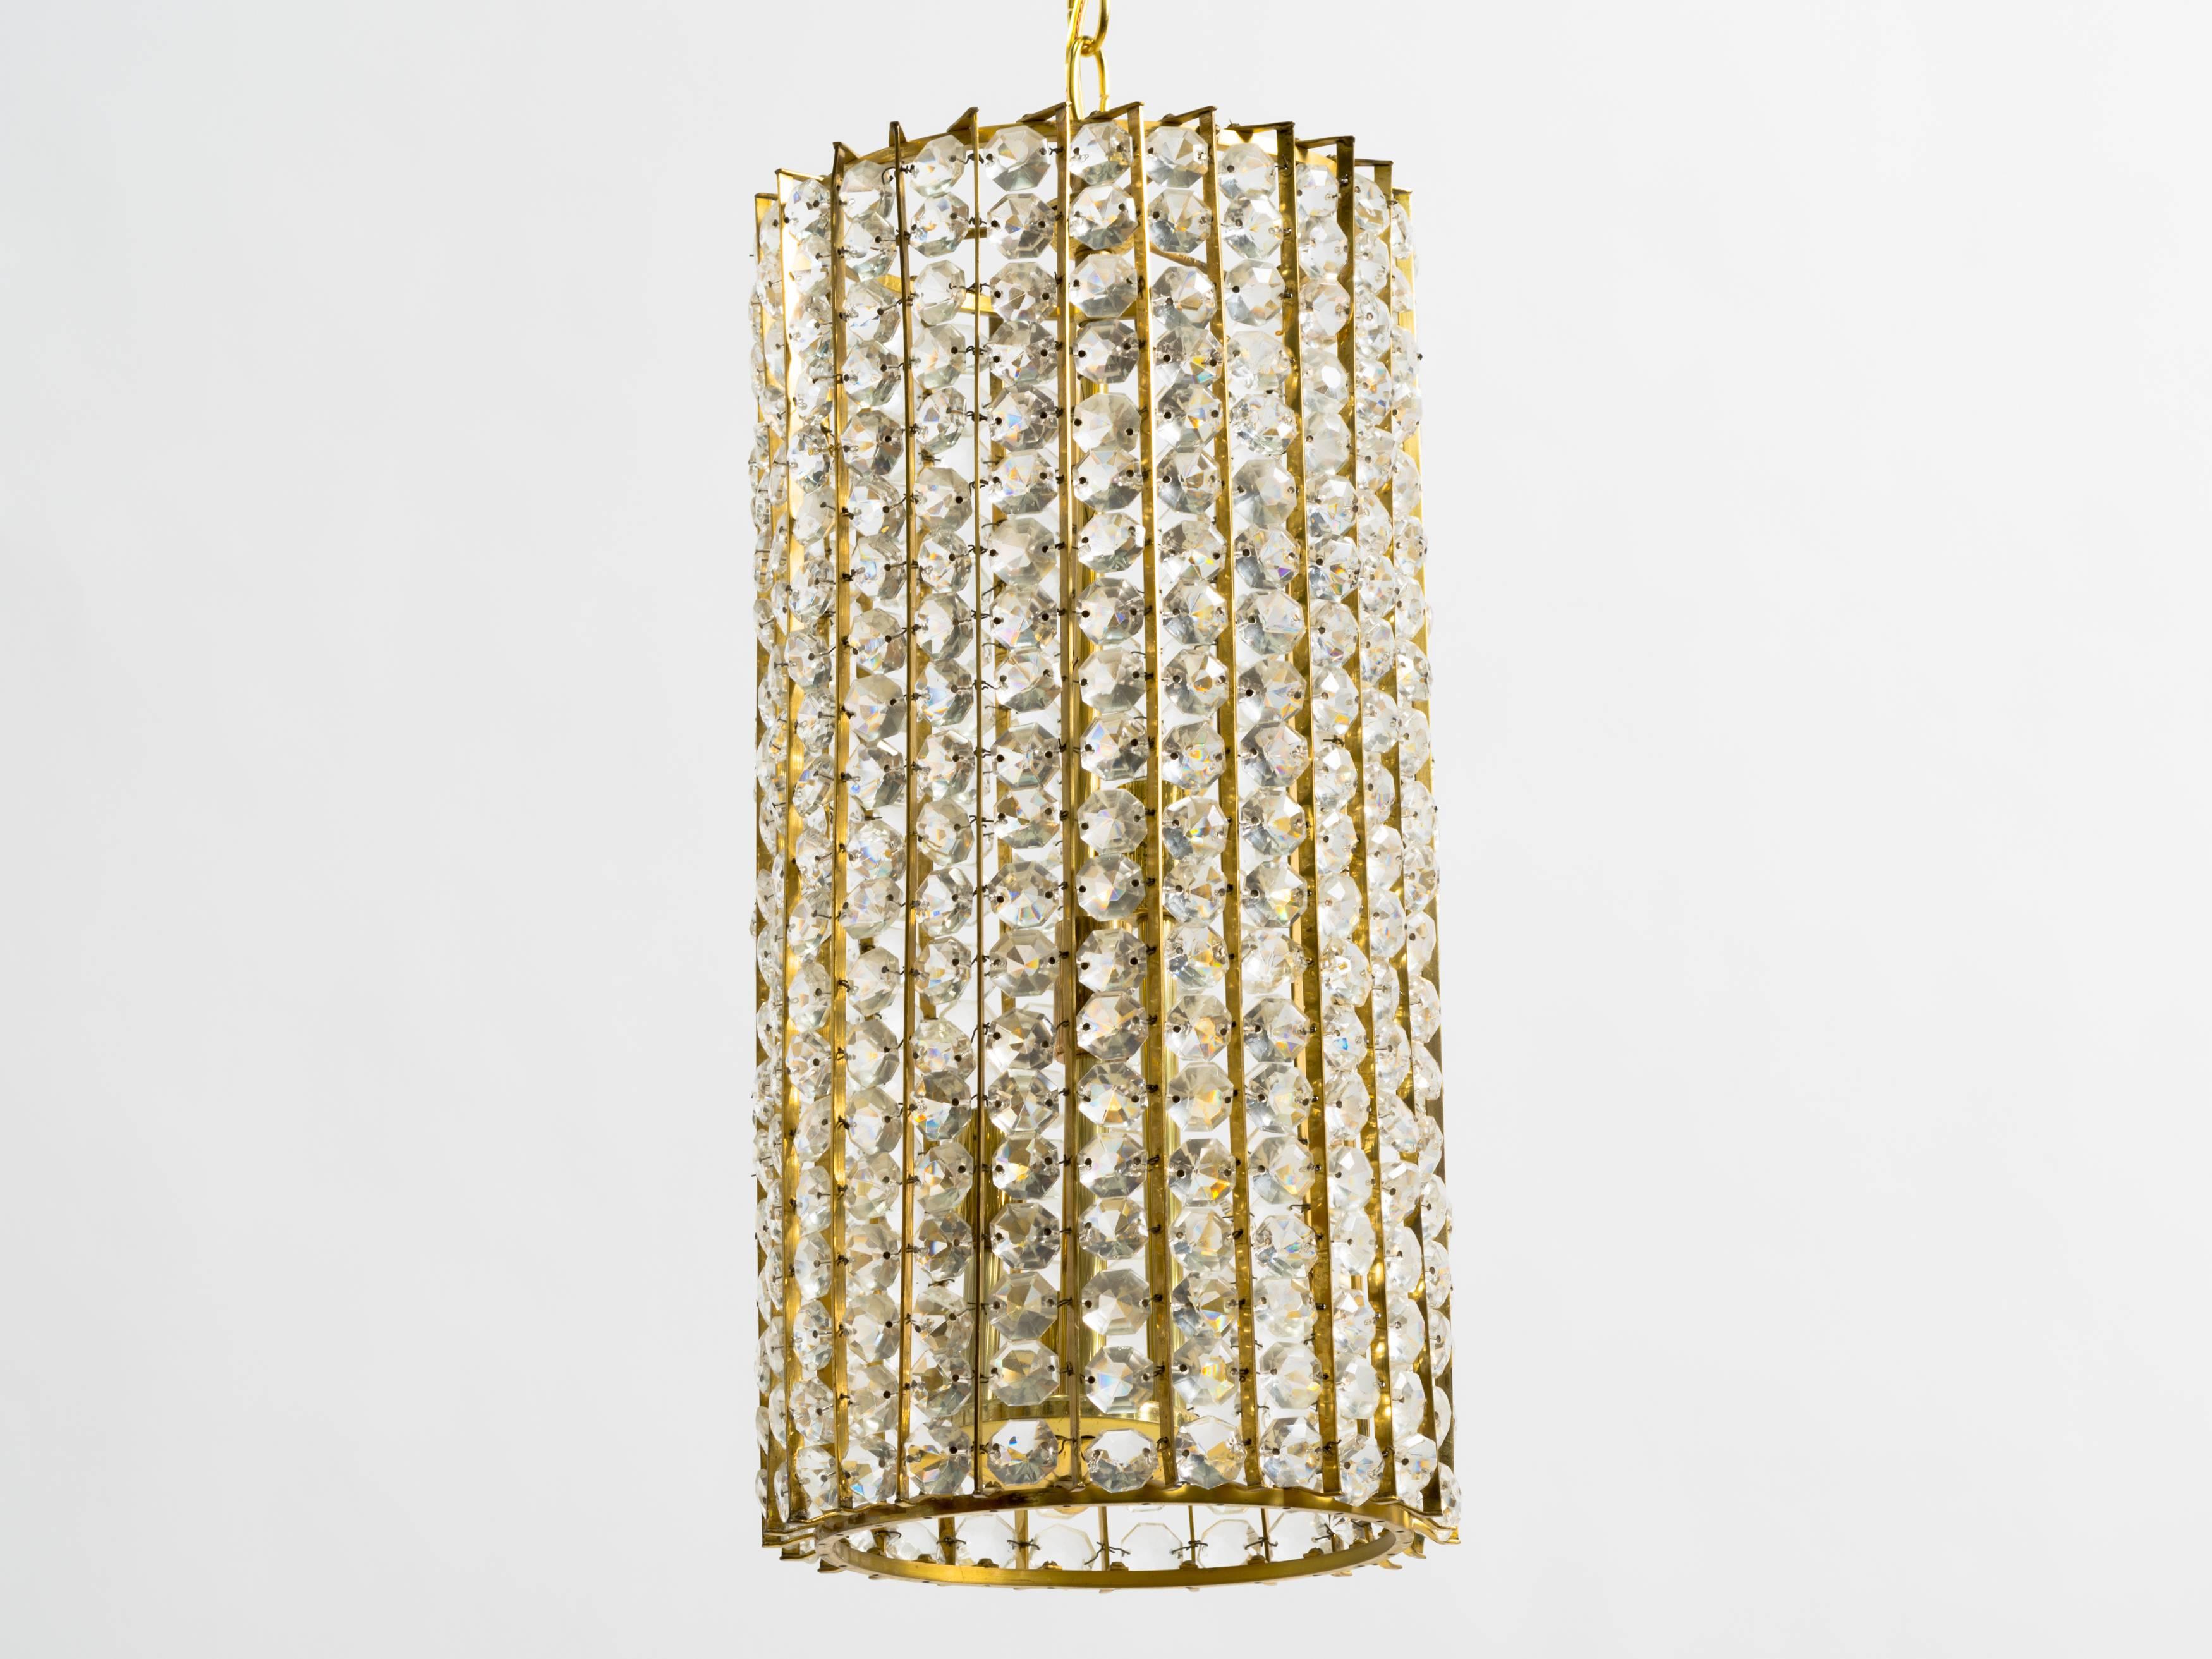 Faceted crystal bead chandelier.
Each crystal is individually attached to brass frame.
Professionally restored and wired.
Four candelabra Max 75W per socket
Italian, 1950s.
Height of only cylinder is 18.5